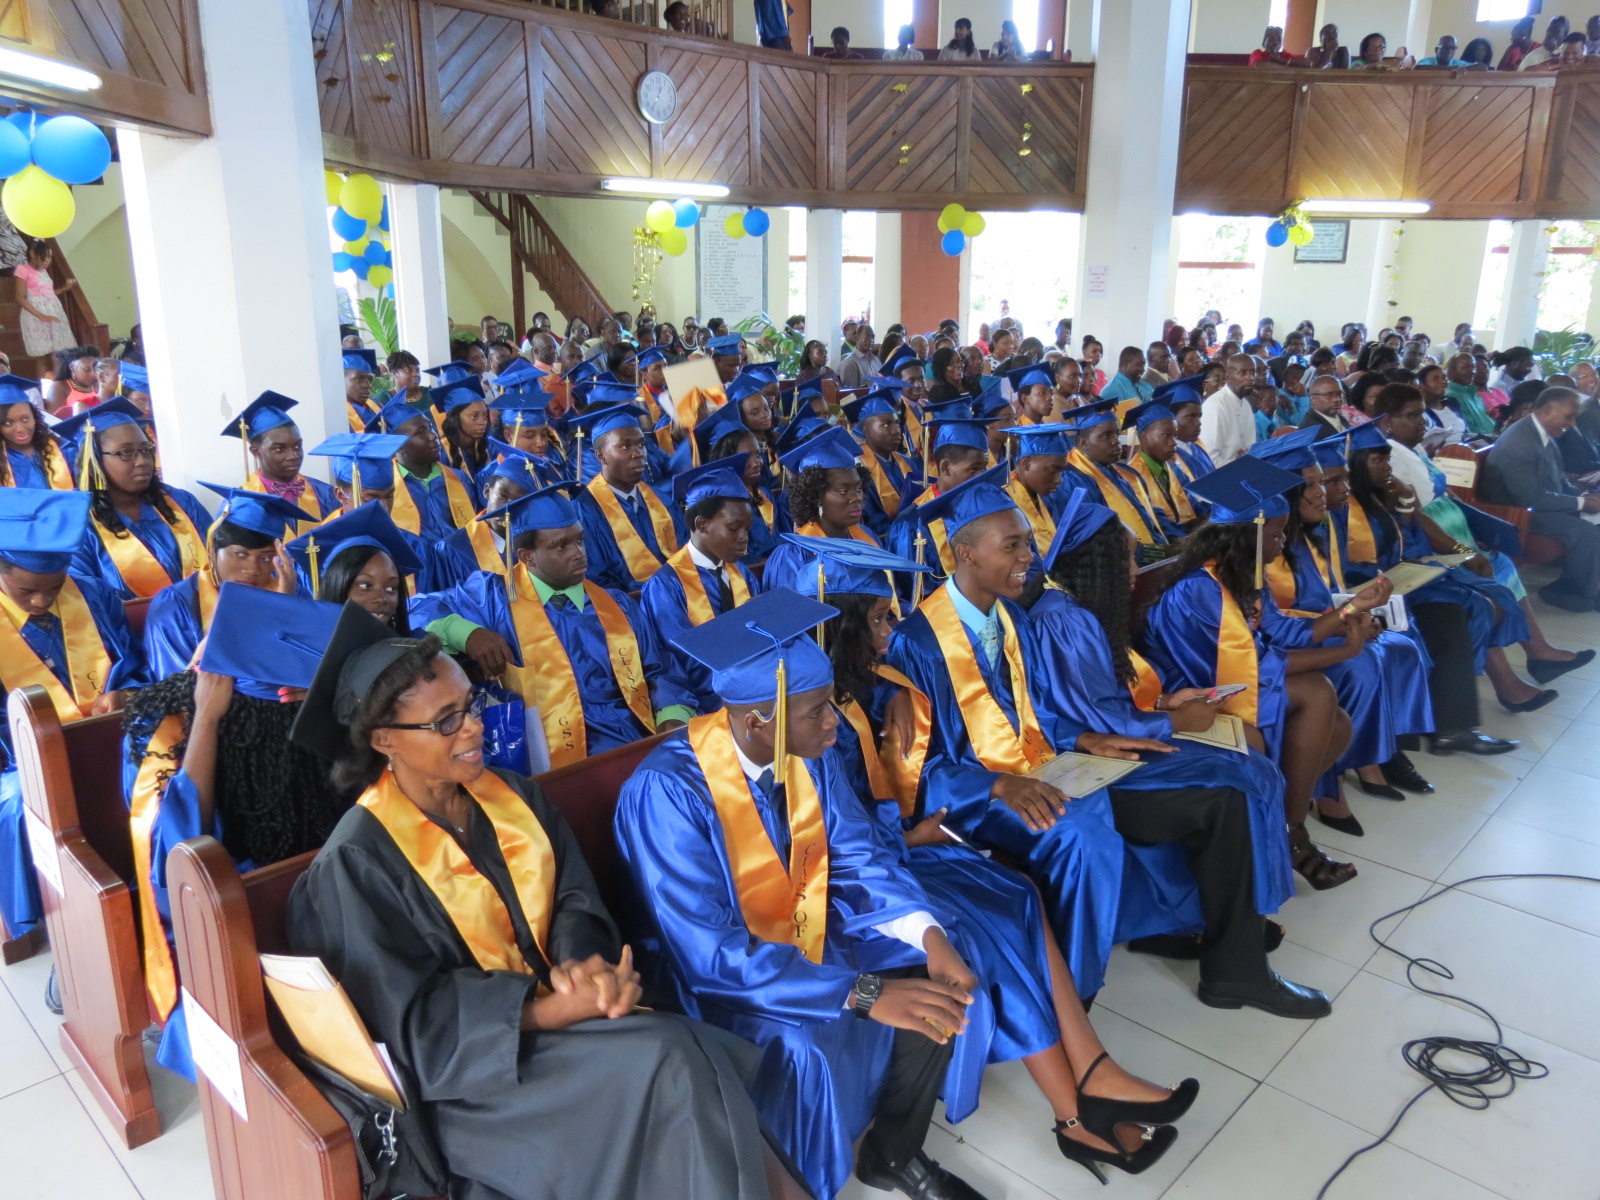 Graduands at the 42nd annual Graduation Ceremony of the Gingerland Secondary School at the Gingerland Methodist Church on November 12, 2015